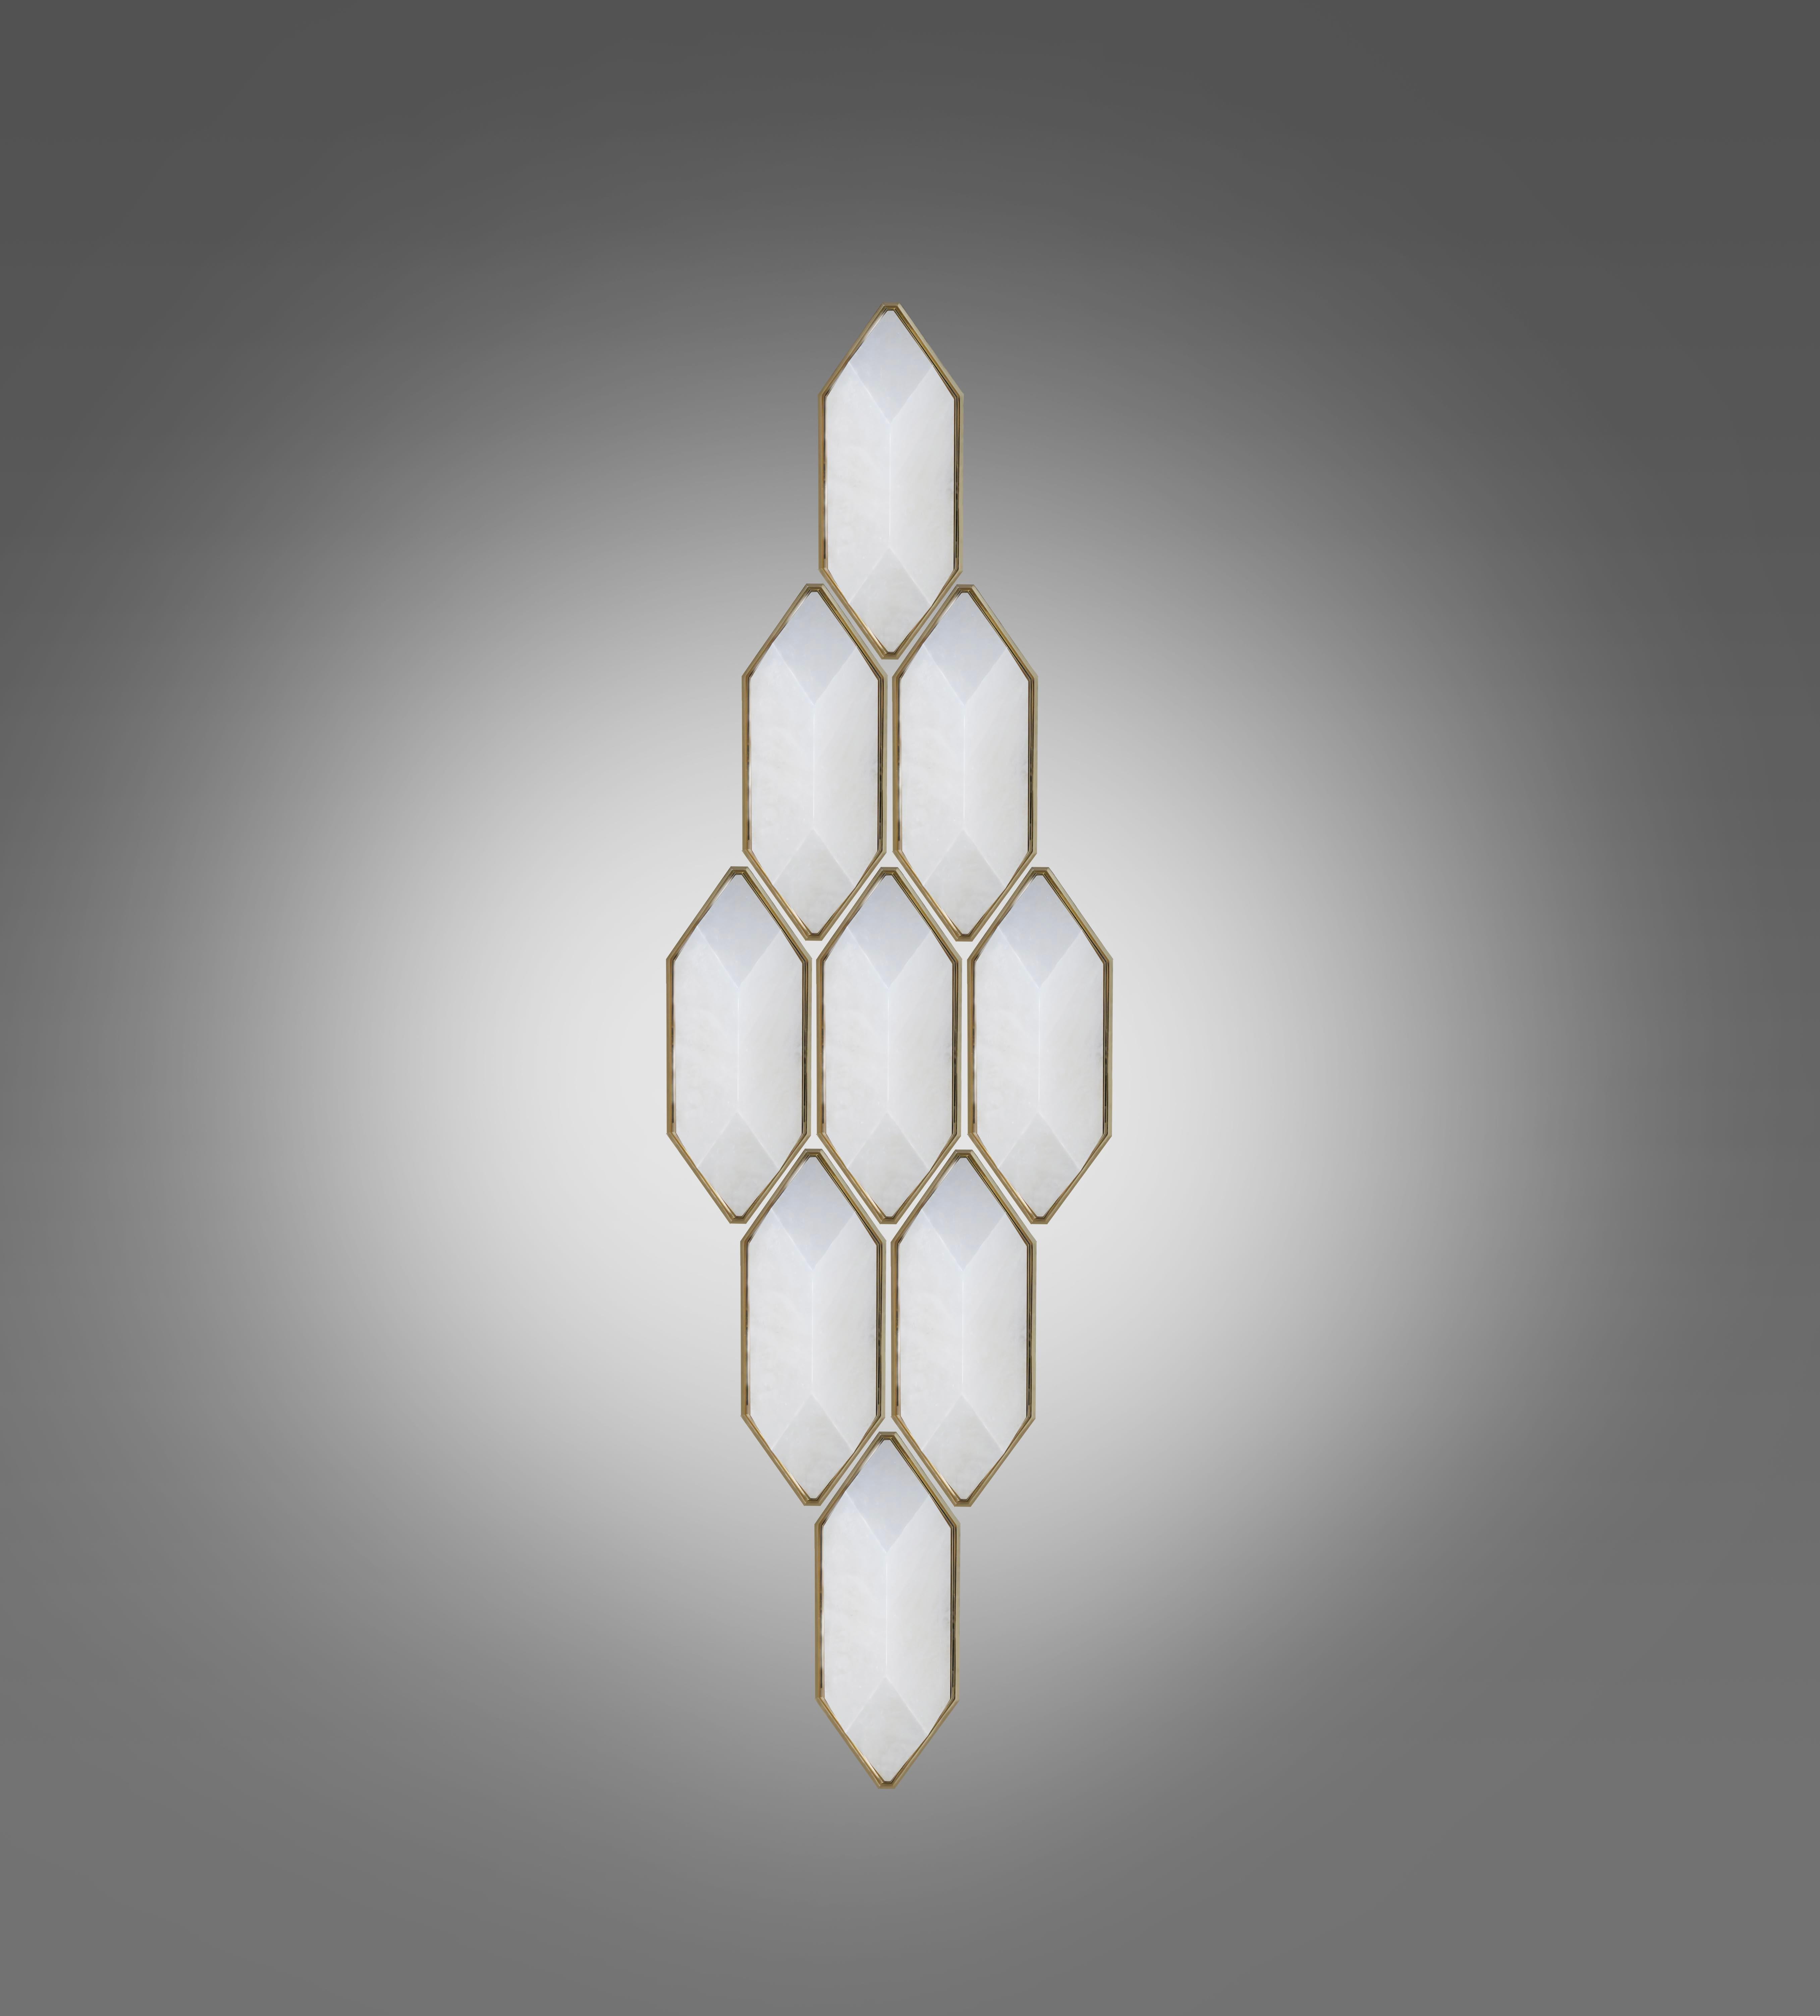 Group of emerald form, fine carved rock crystal sconces set up in a diamond form. Created by Phoenix gallery NYC. 
Each sconce is 12” high, 5.5” wide, and 4.5” projection, with polished brass frame. 

Custom size upon request.